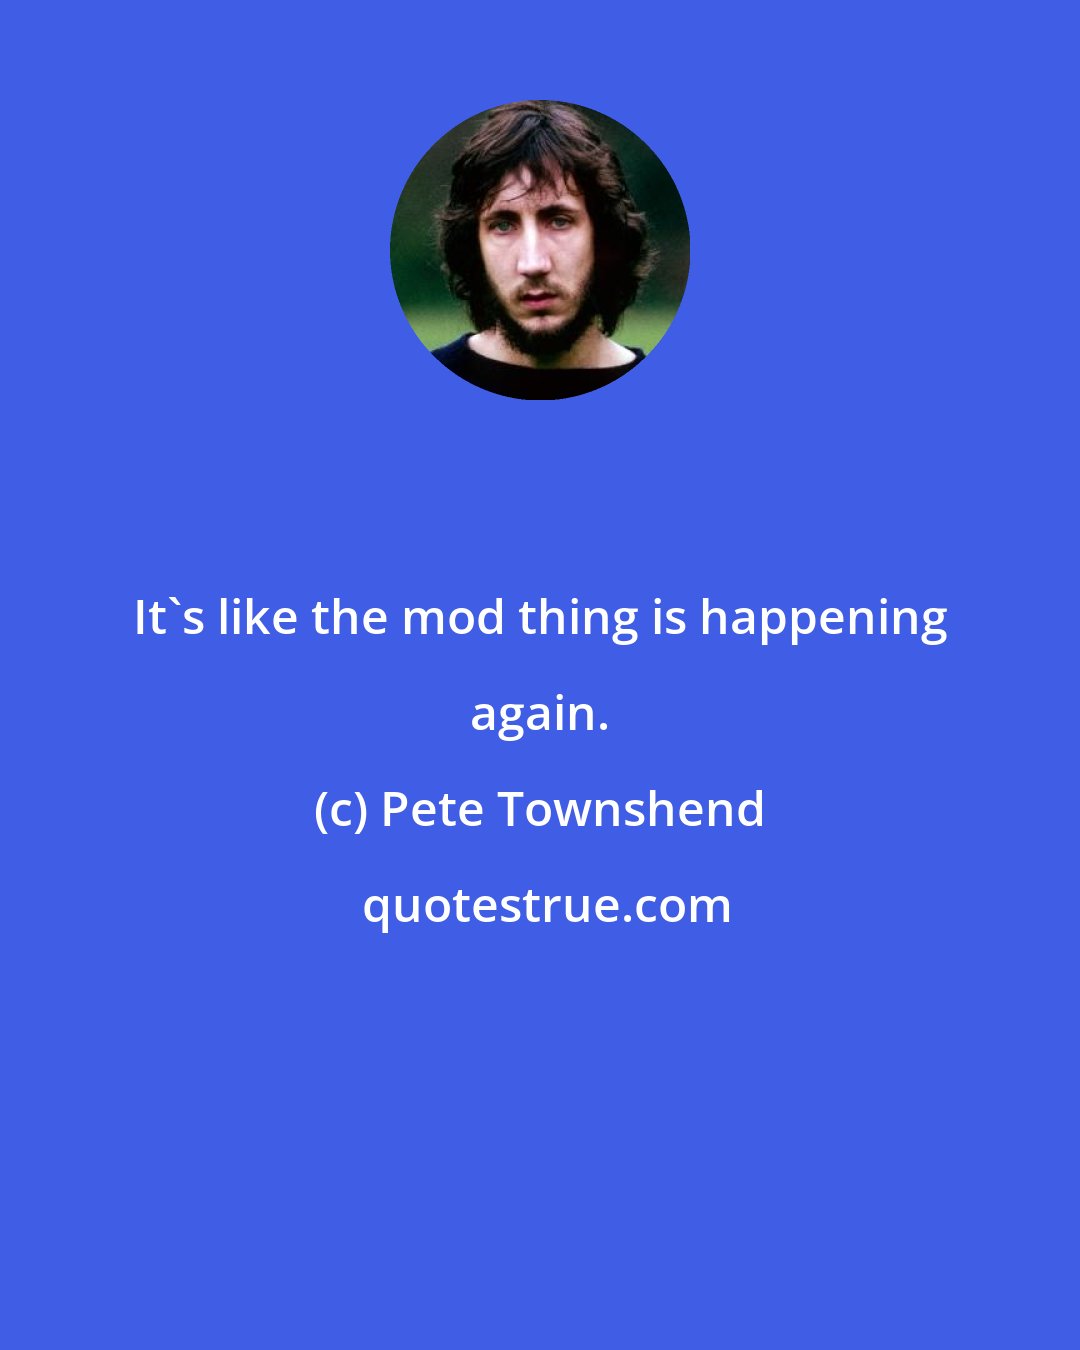 Pete Townshend: It's like the mod thing is happening again.